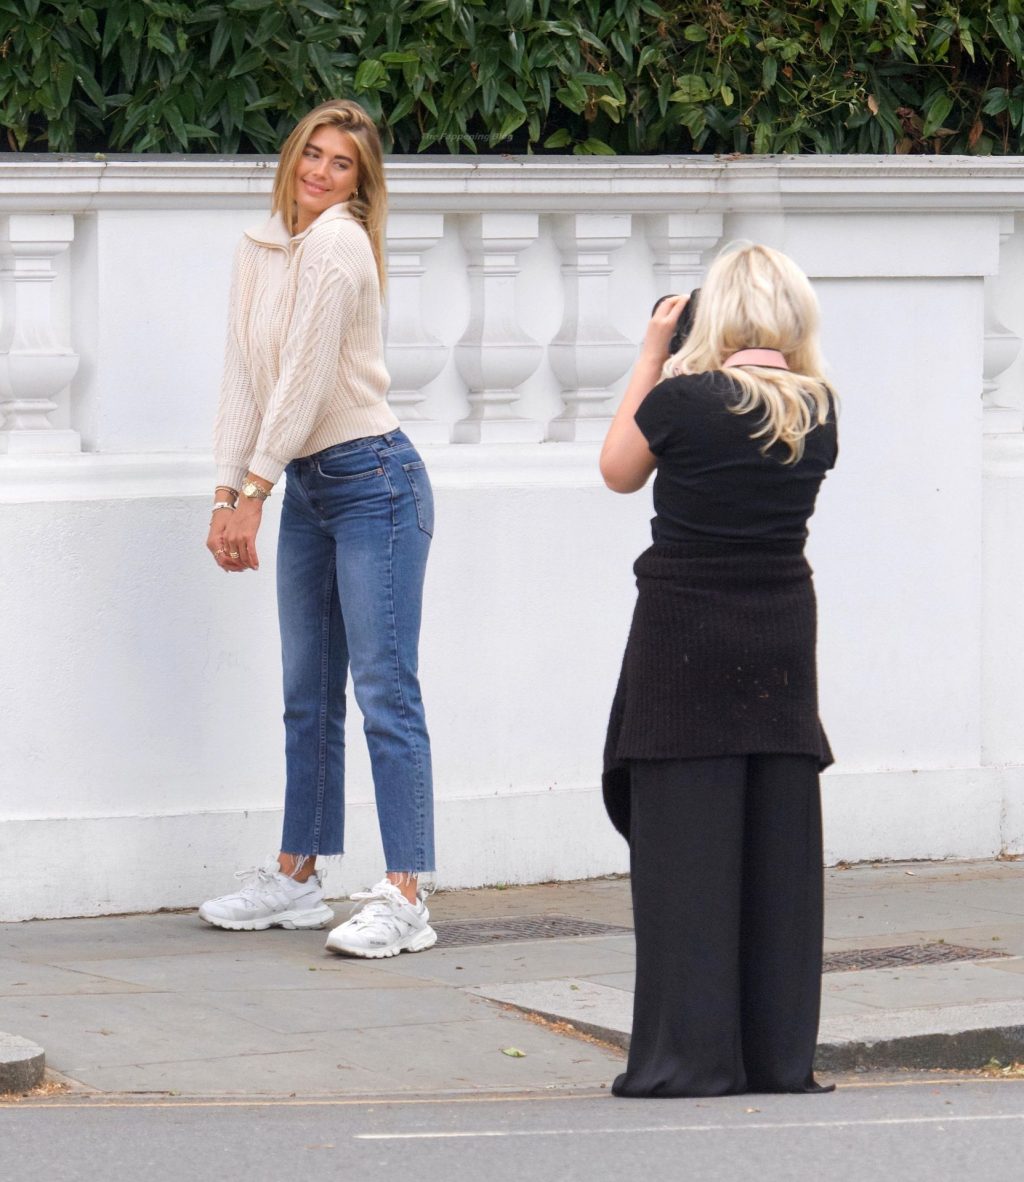 Arabella Chi is Seen Doing a Photoshoot in London (44 Photos)